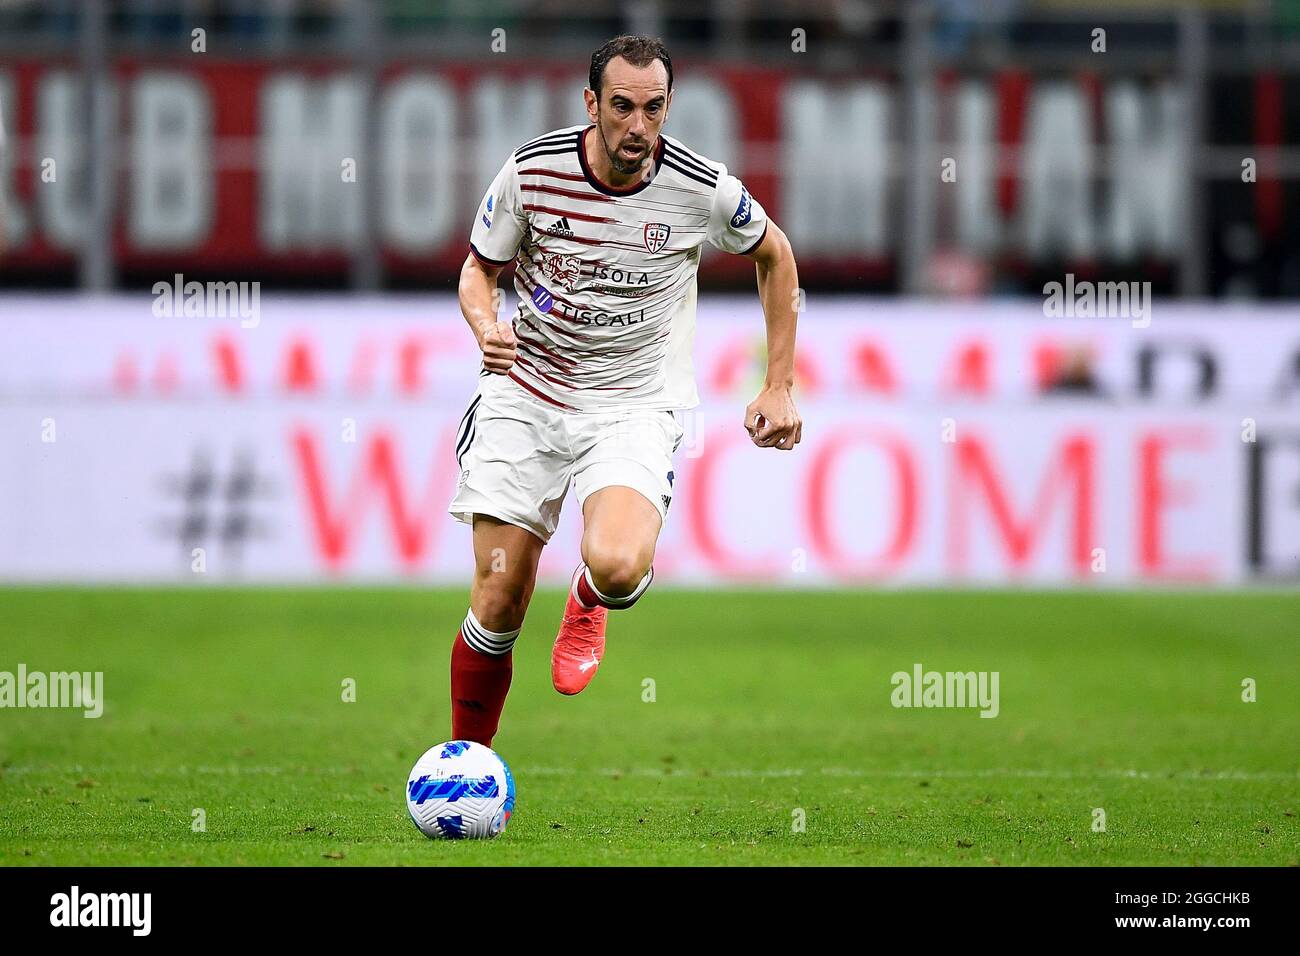 Milan, Italy. 29 August 2021. Diego Godin of Cagliari Calcio in action during the Serie A football match between AC Milan and Cagliari Calcio. Credit: Nicolò Campo/Alamy Live News Stock Photo